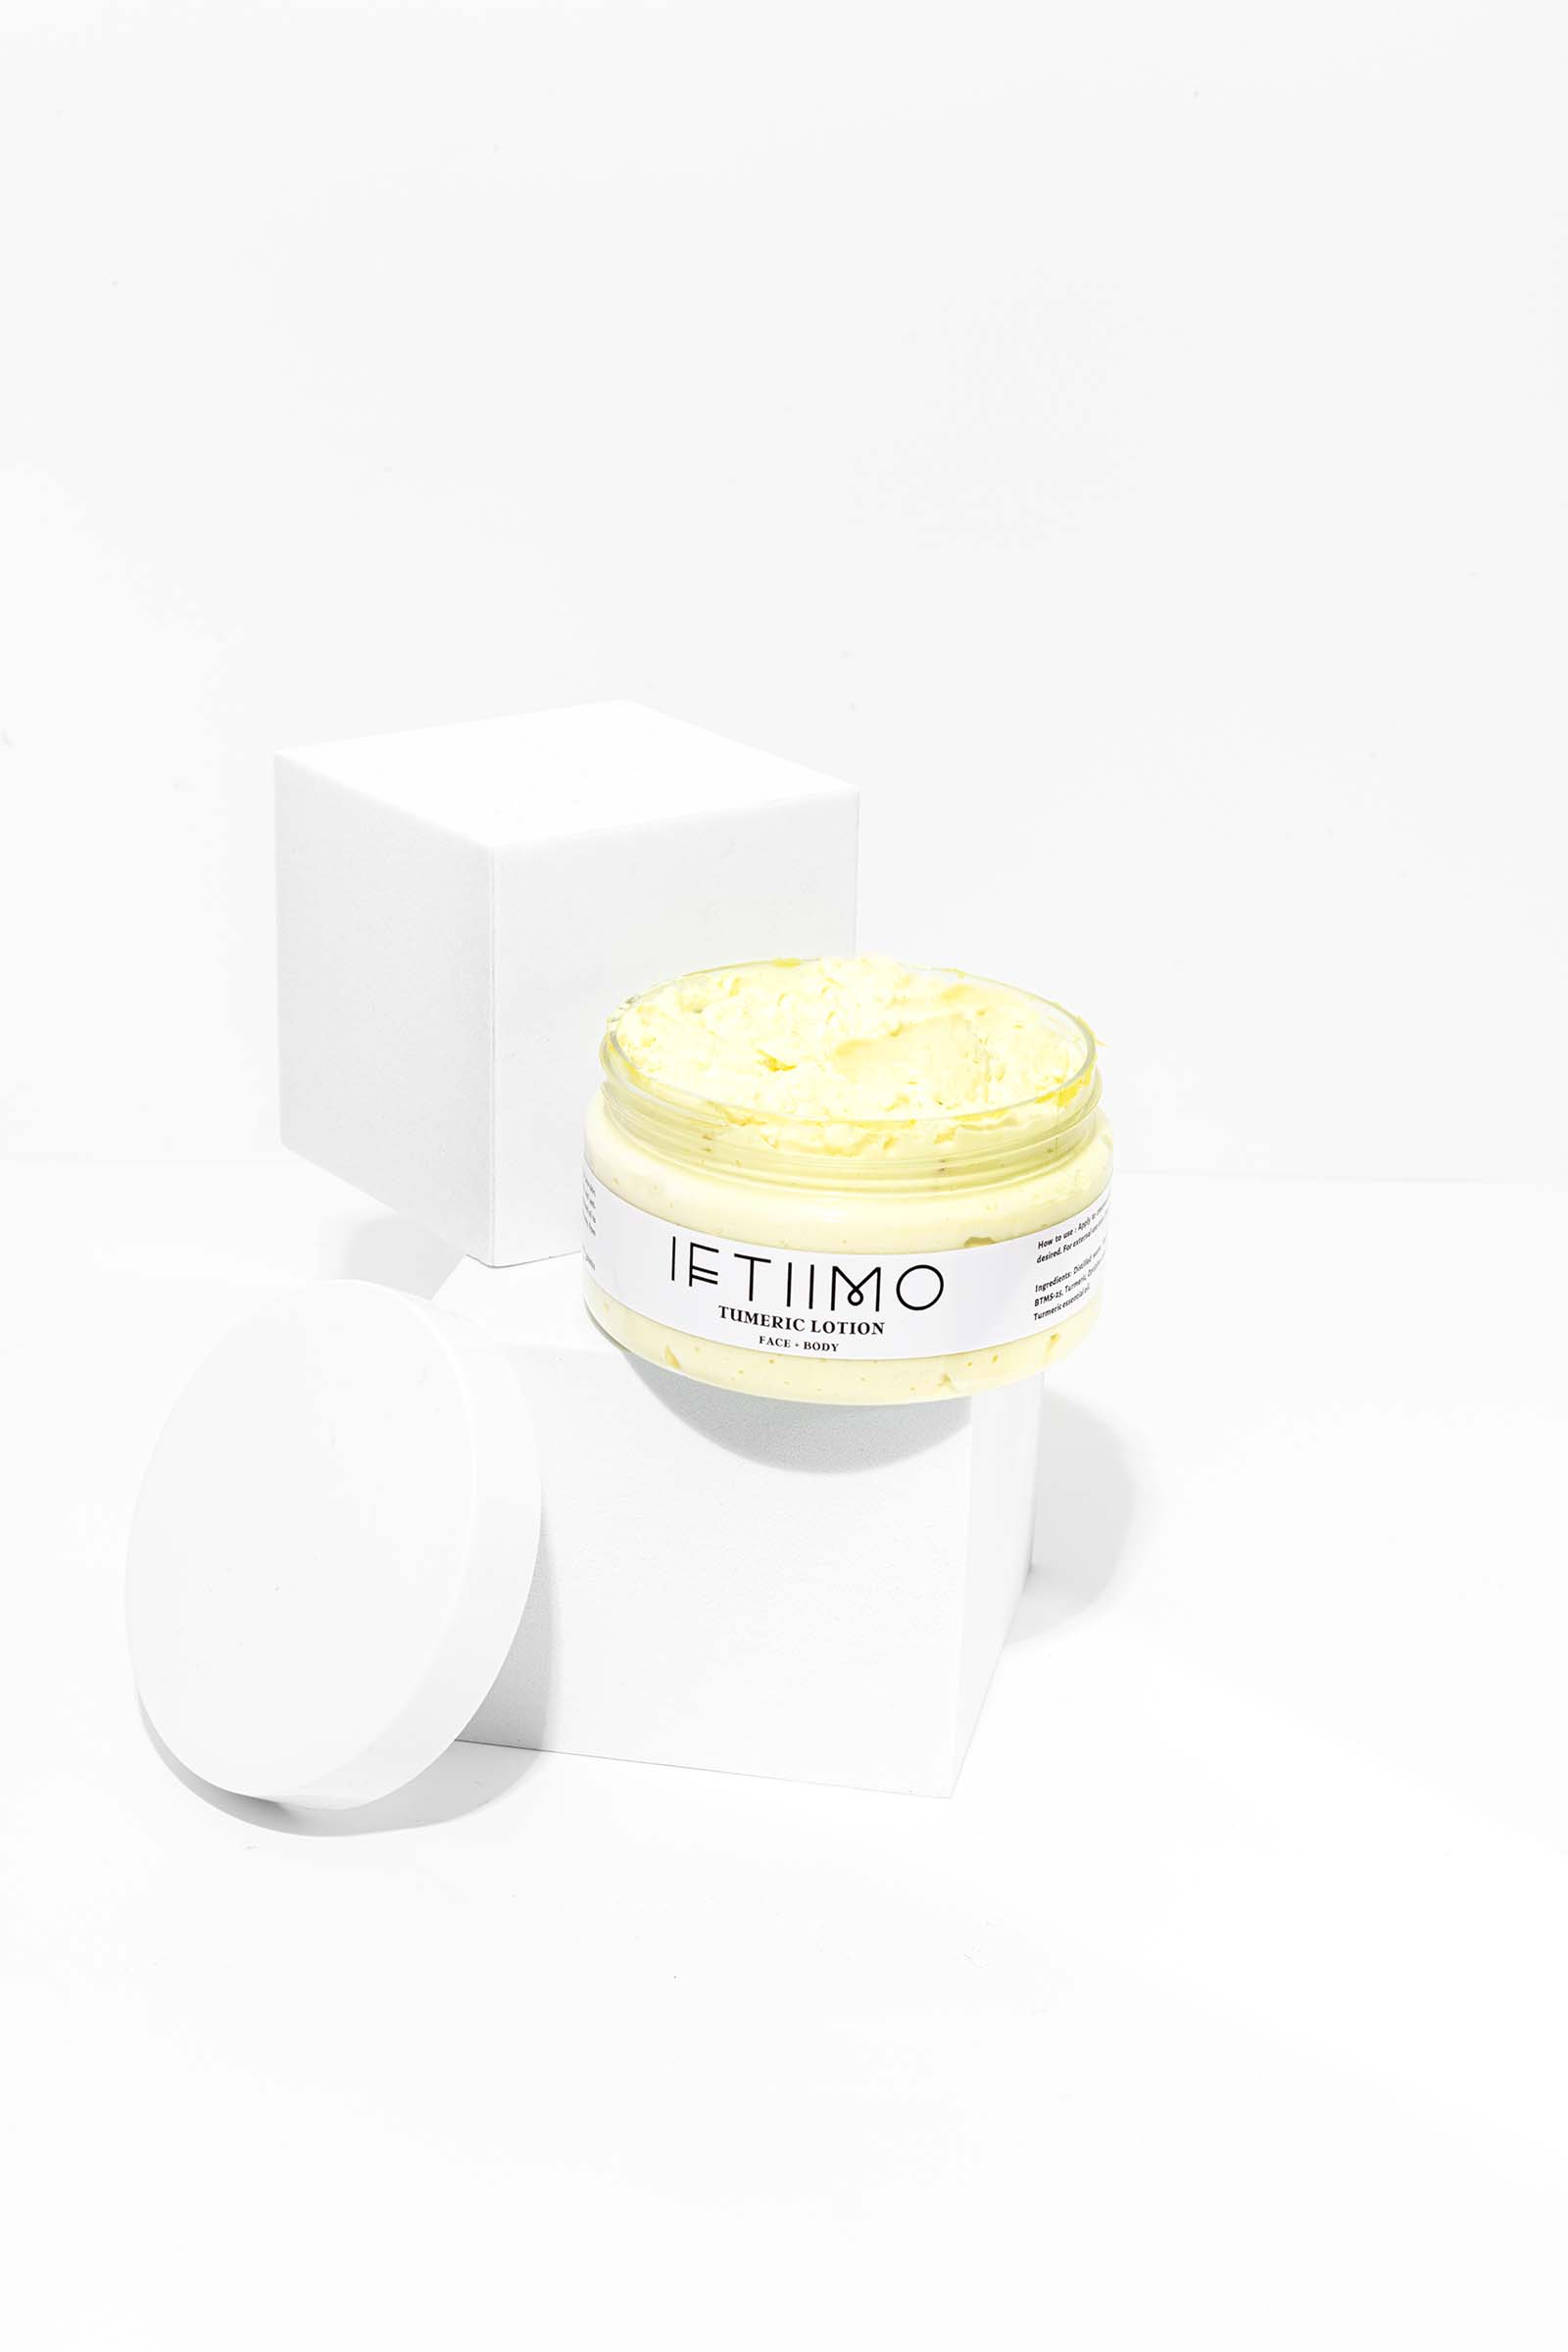 Plain White Styled Product Photos for a Skincare Brand. Styled Product Still by Colourpop Studio